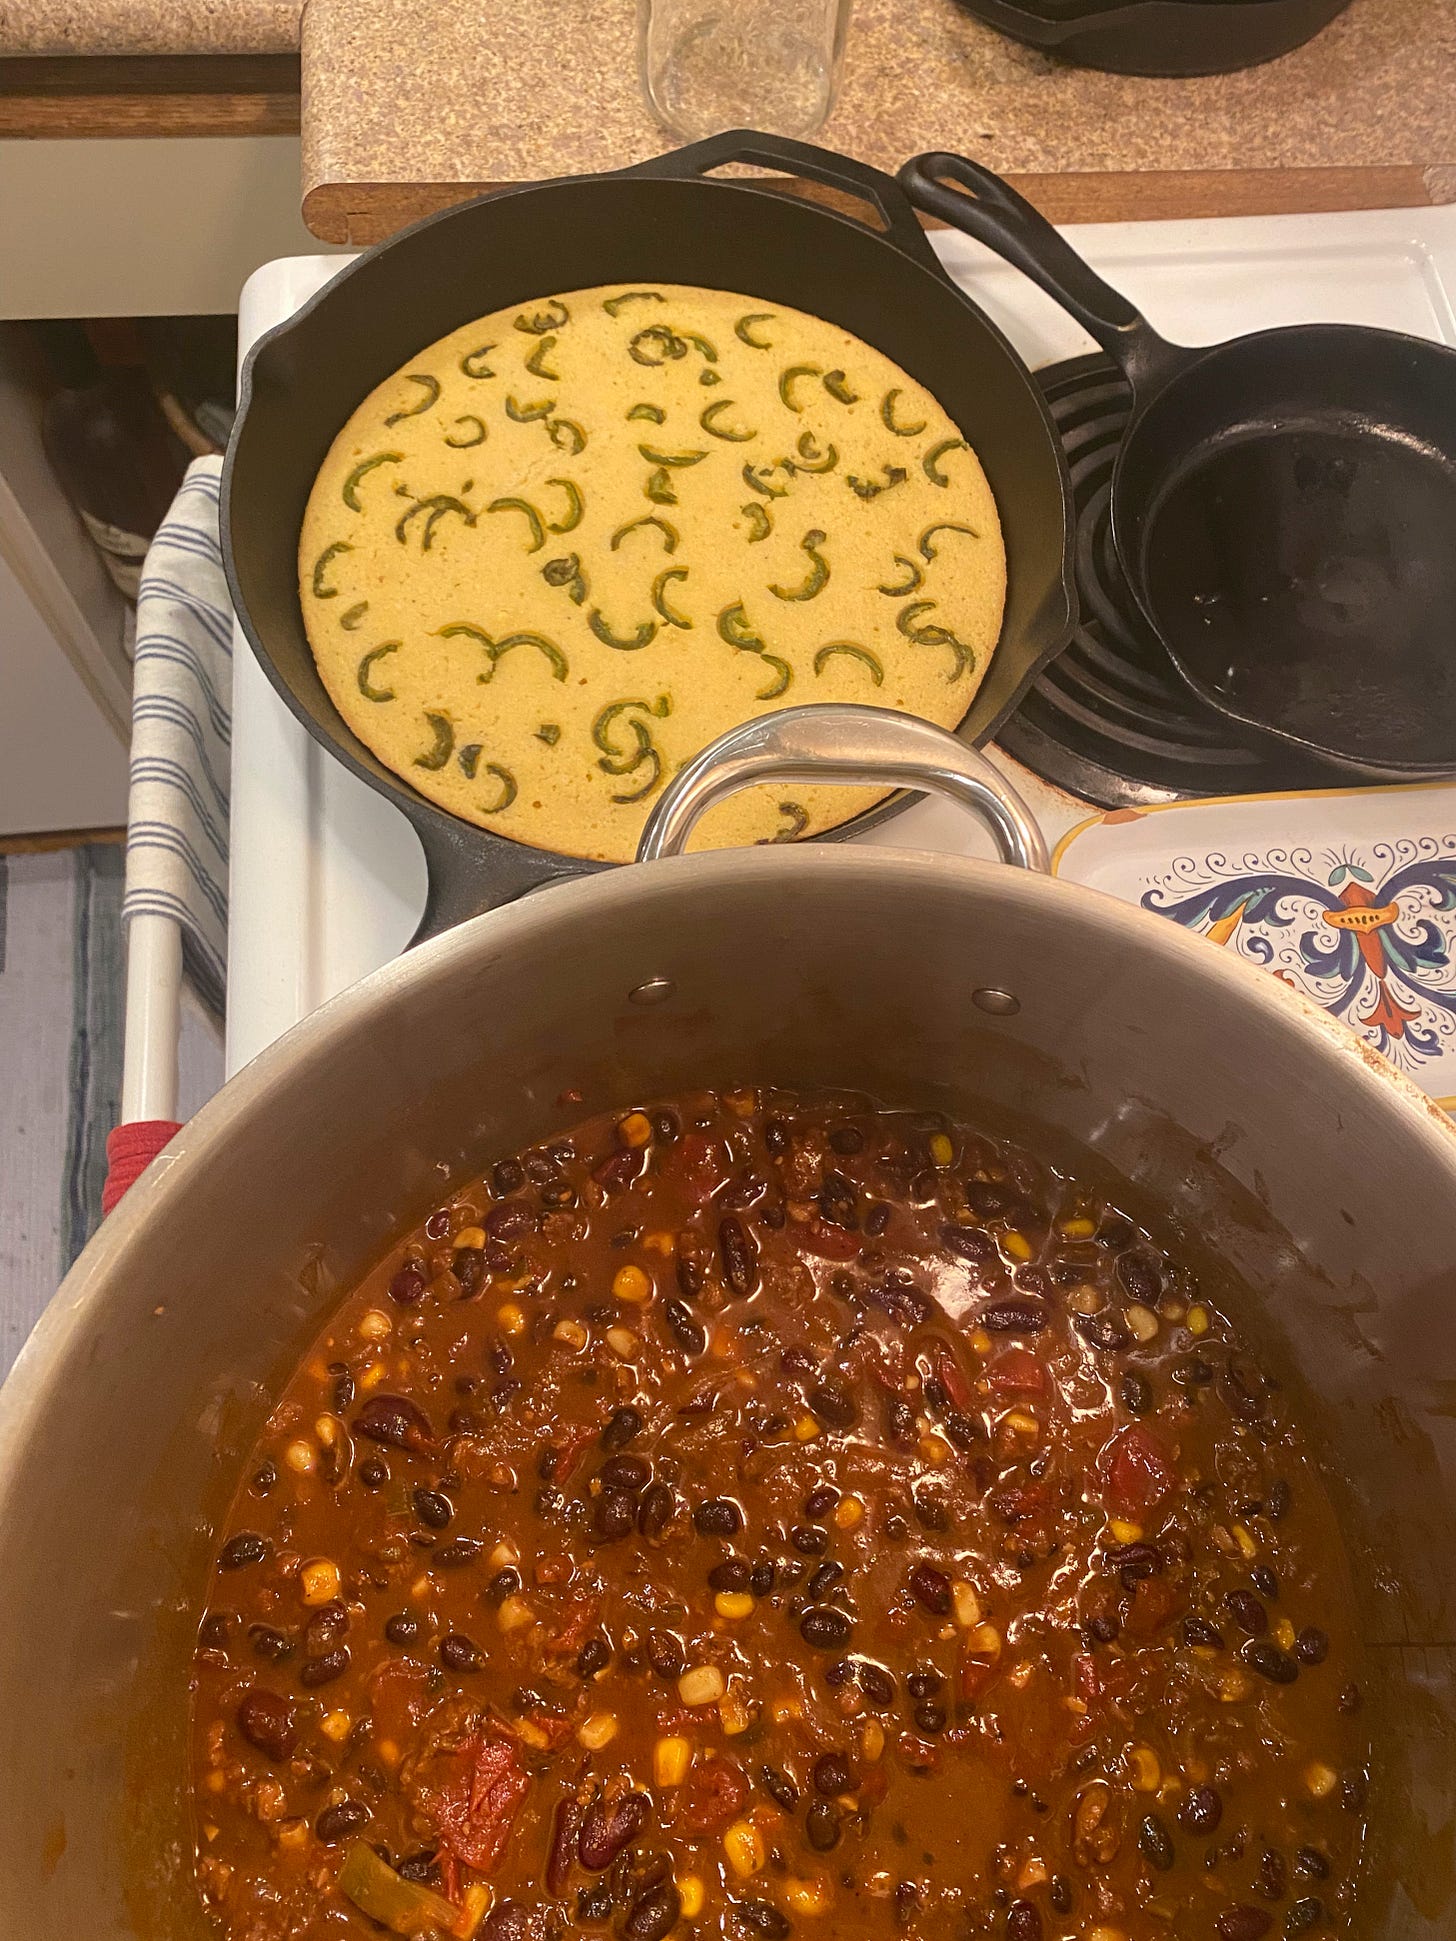 On the stove is a cast iron pan of cornbread with slices of jalapeño baked in. In front of it is a large stockpot, with the chili described above in it.